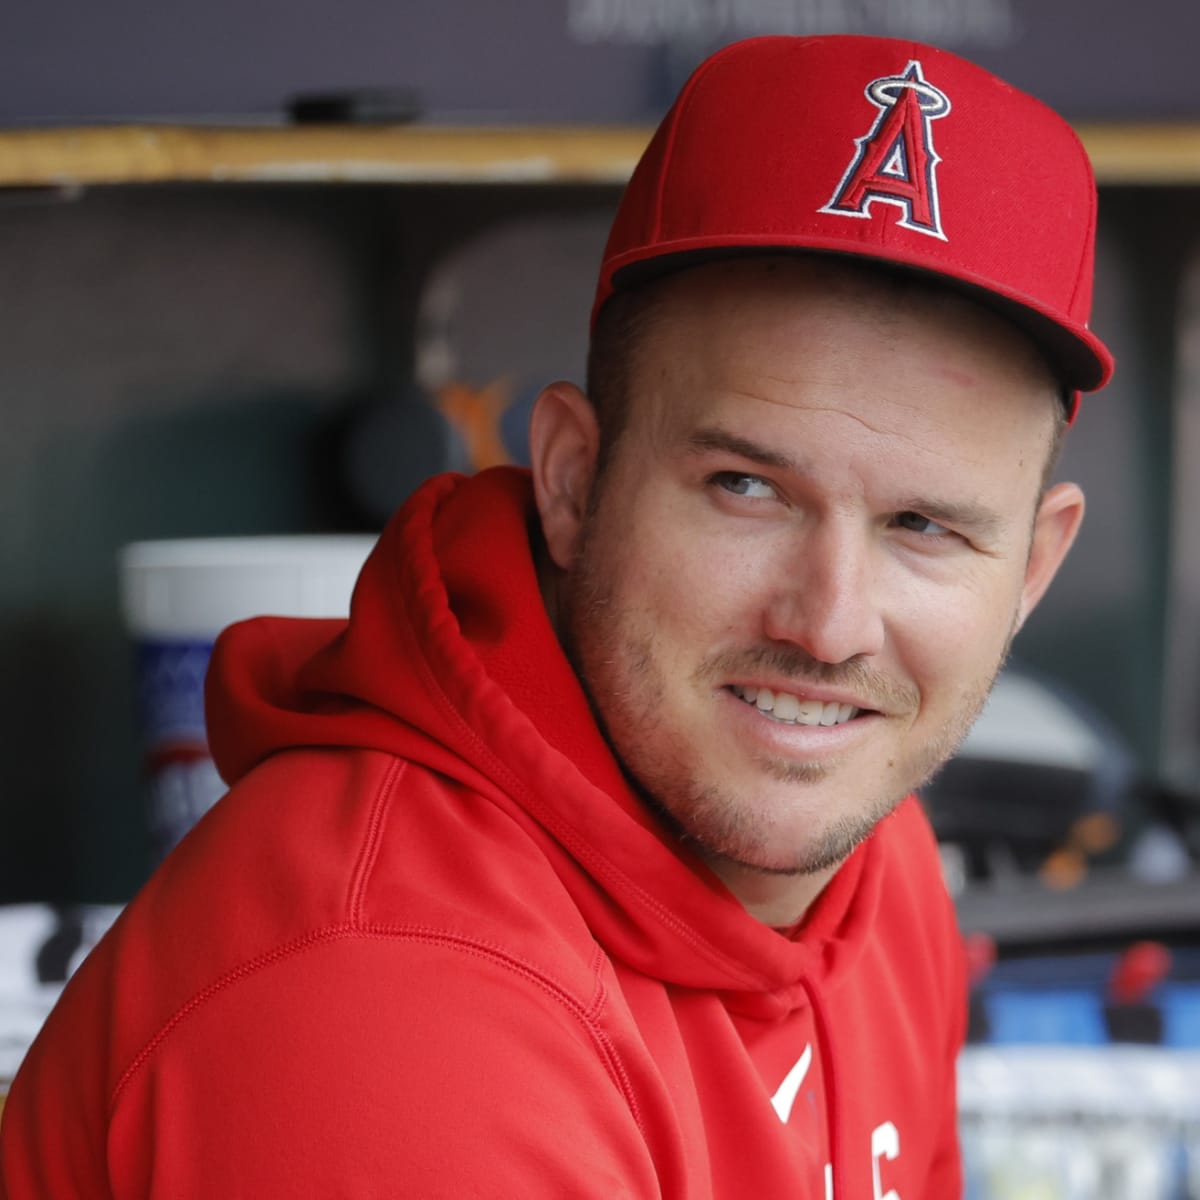 Mike Trout discusses injury, rehab